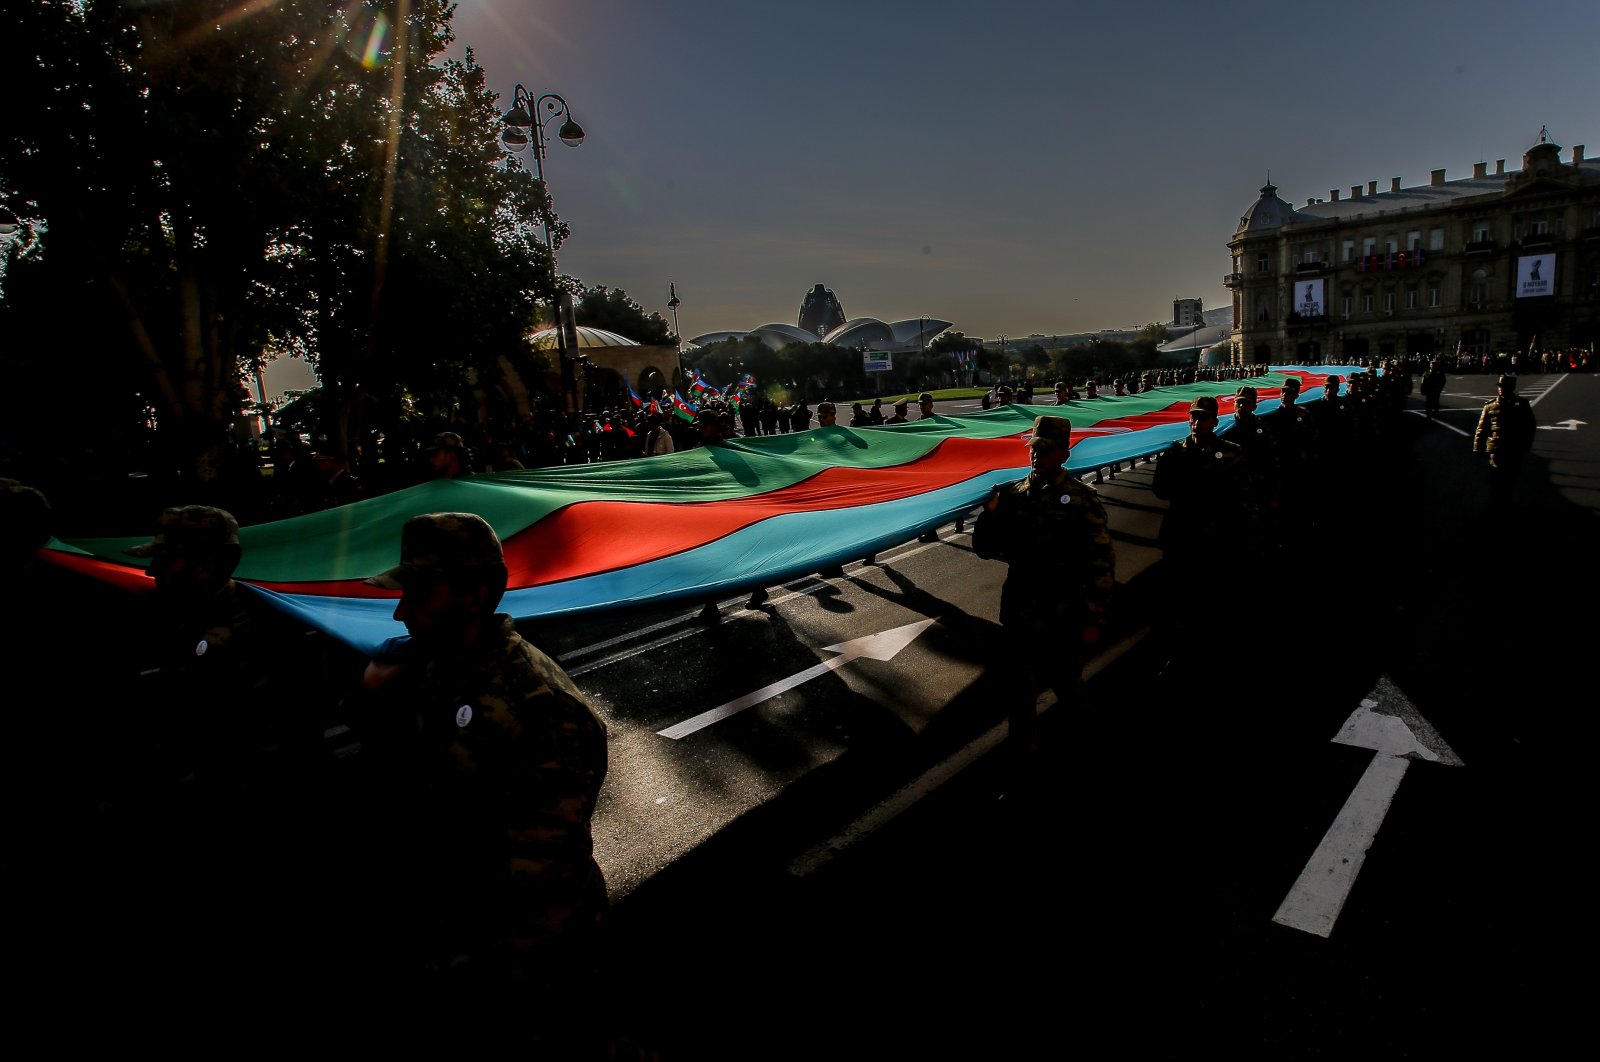 Azerbaijani service members carry a giant flag during a procession marking the anniversary of their victory in the 2020 military conflict over the Karabakh region, Baku, Azerbaijan, Nov. 8, 2021. (Getty Images Photo)